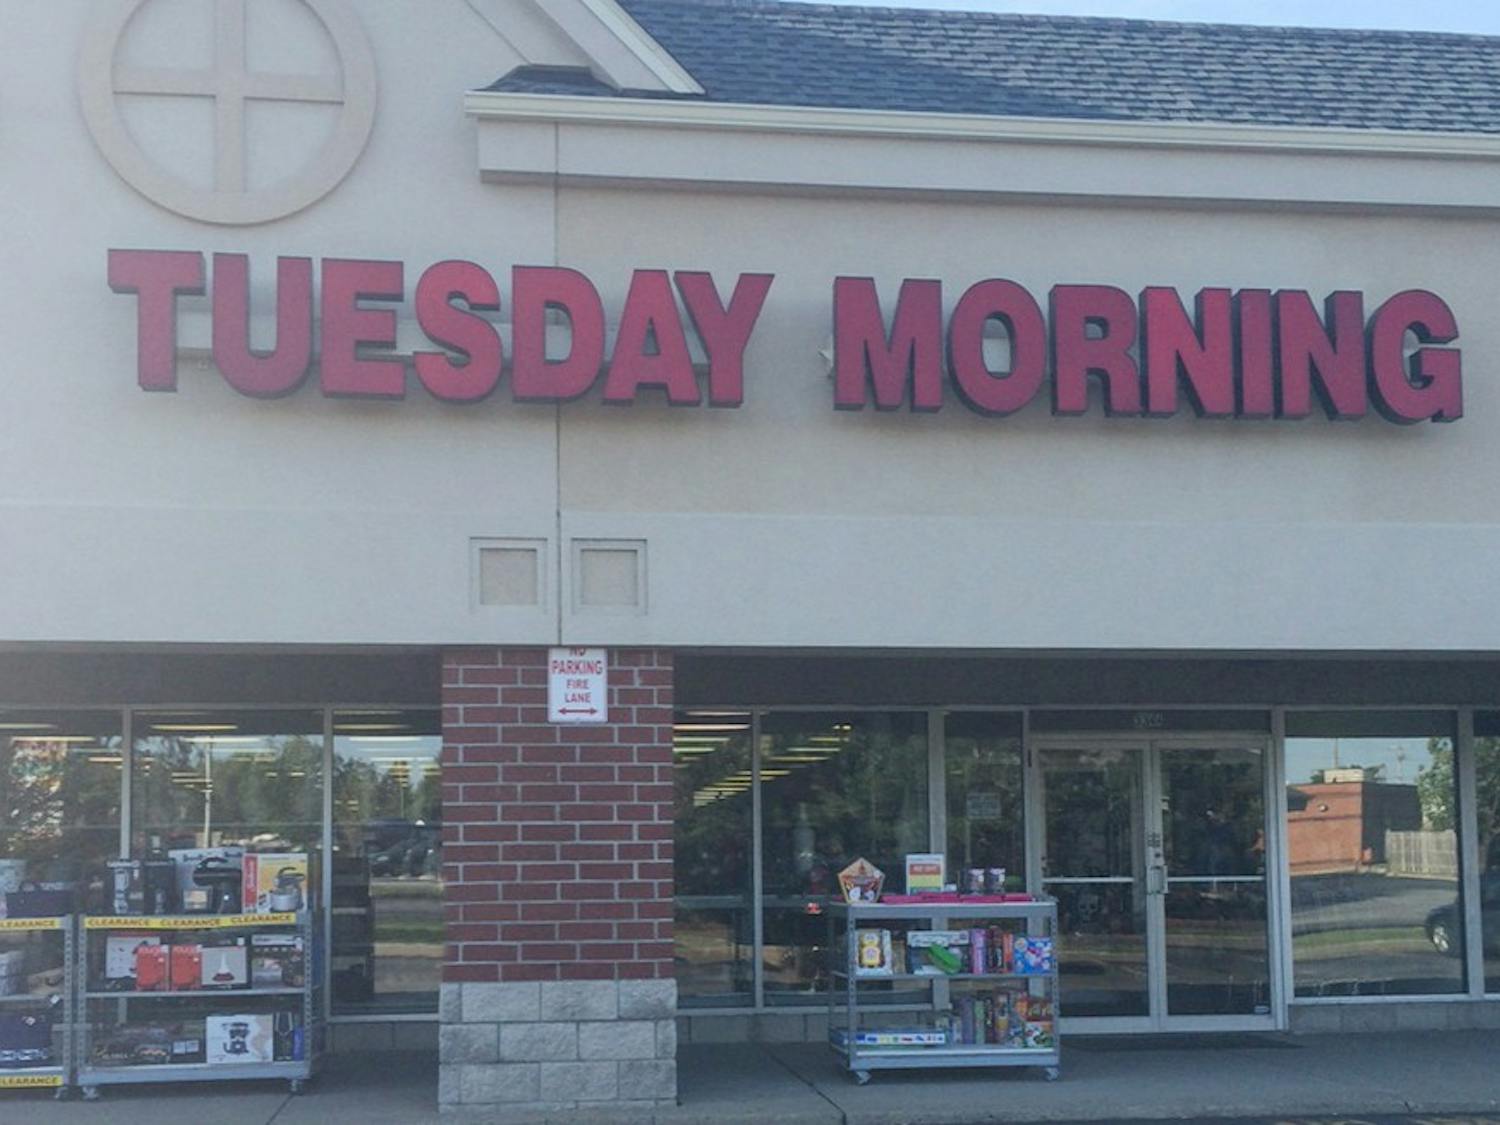 Tuesday Morning has more than just clothing, the store has supplies, electronics and knick knacks.